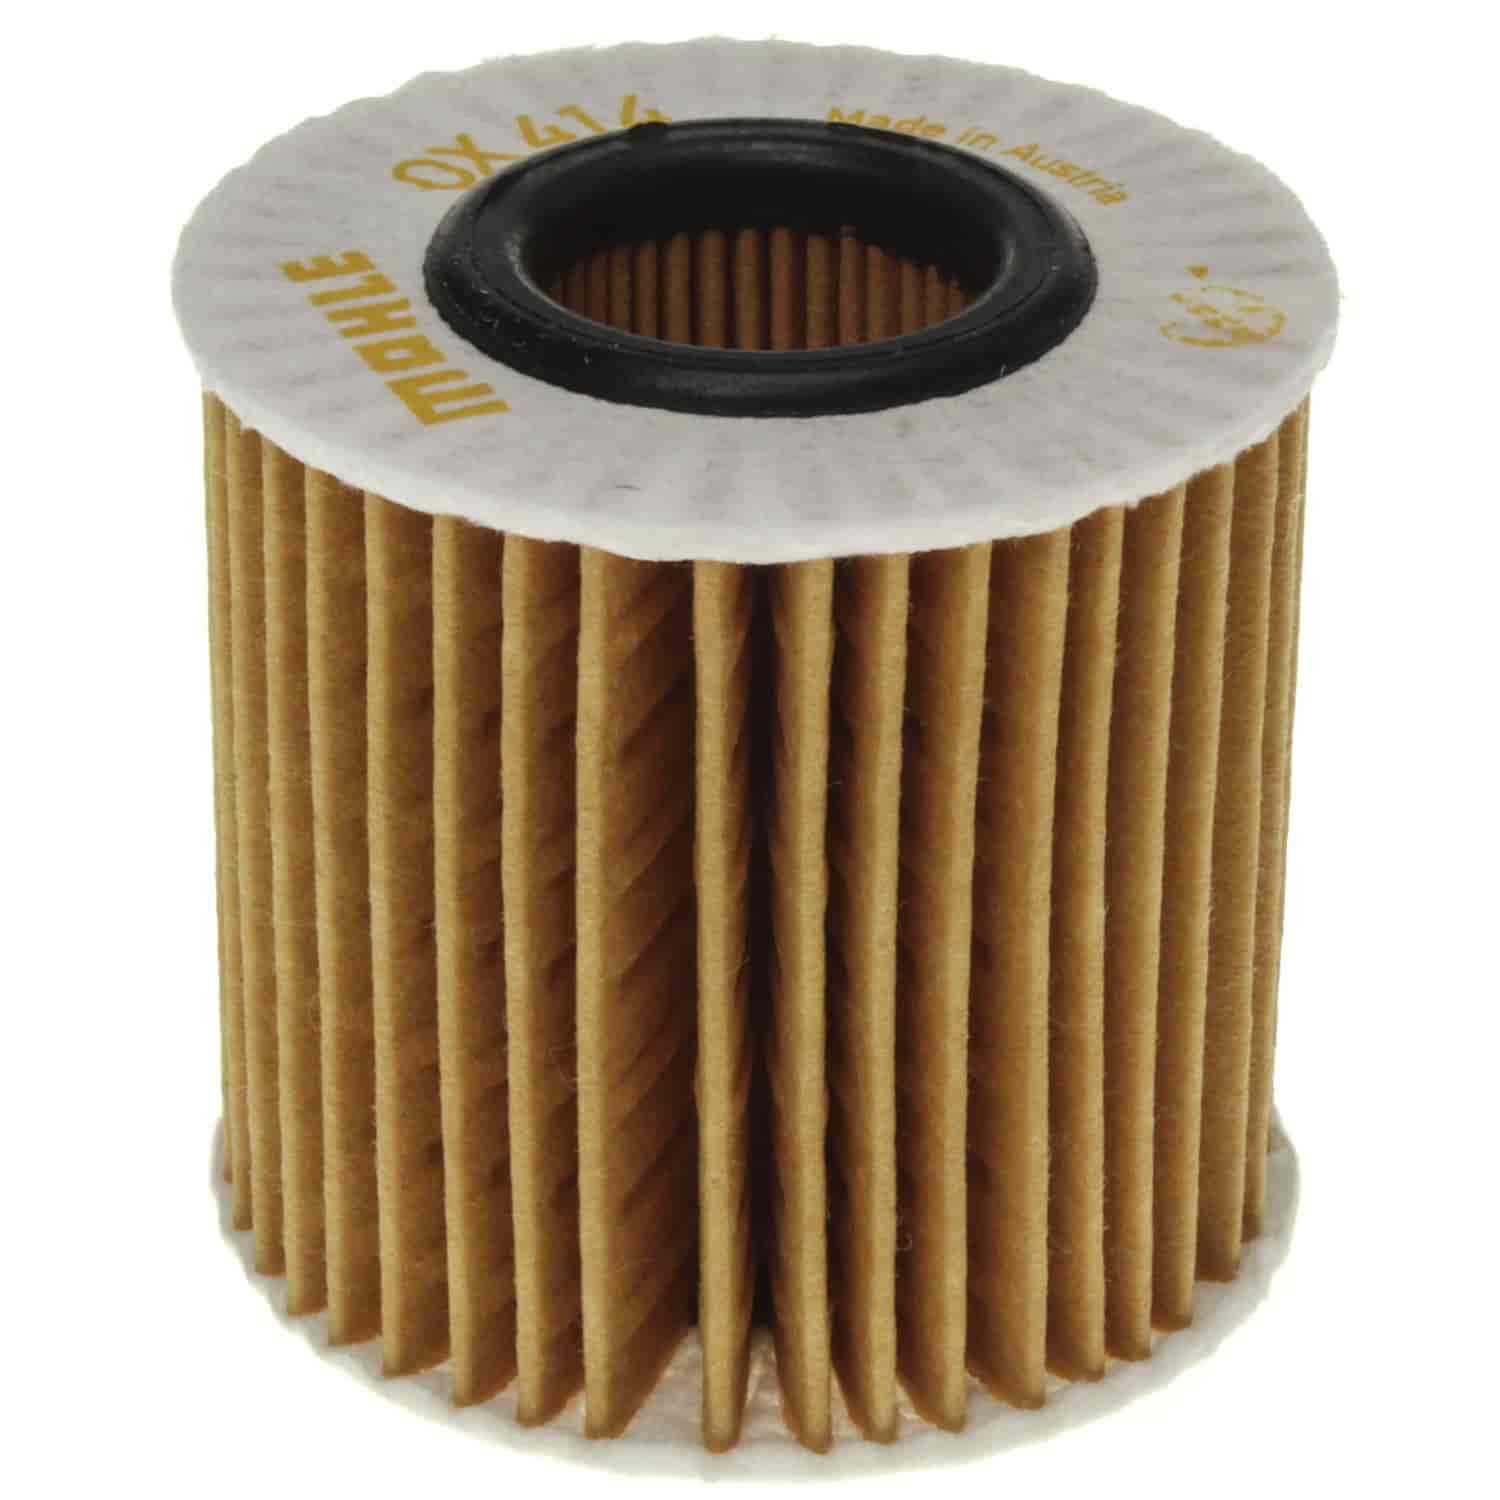 Mahle Oil Filter 2005-2016 Various Toyota V6 & L4 Engines